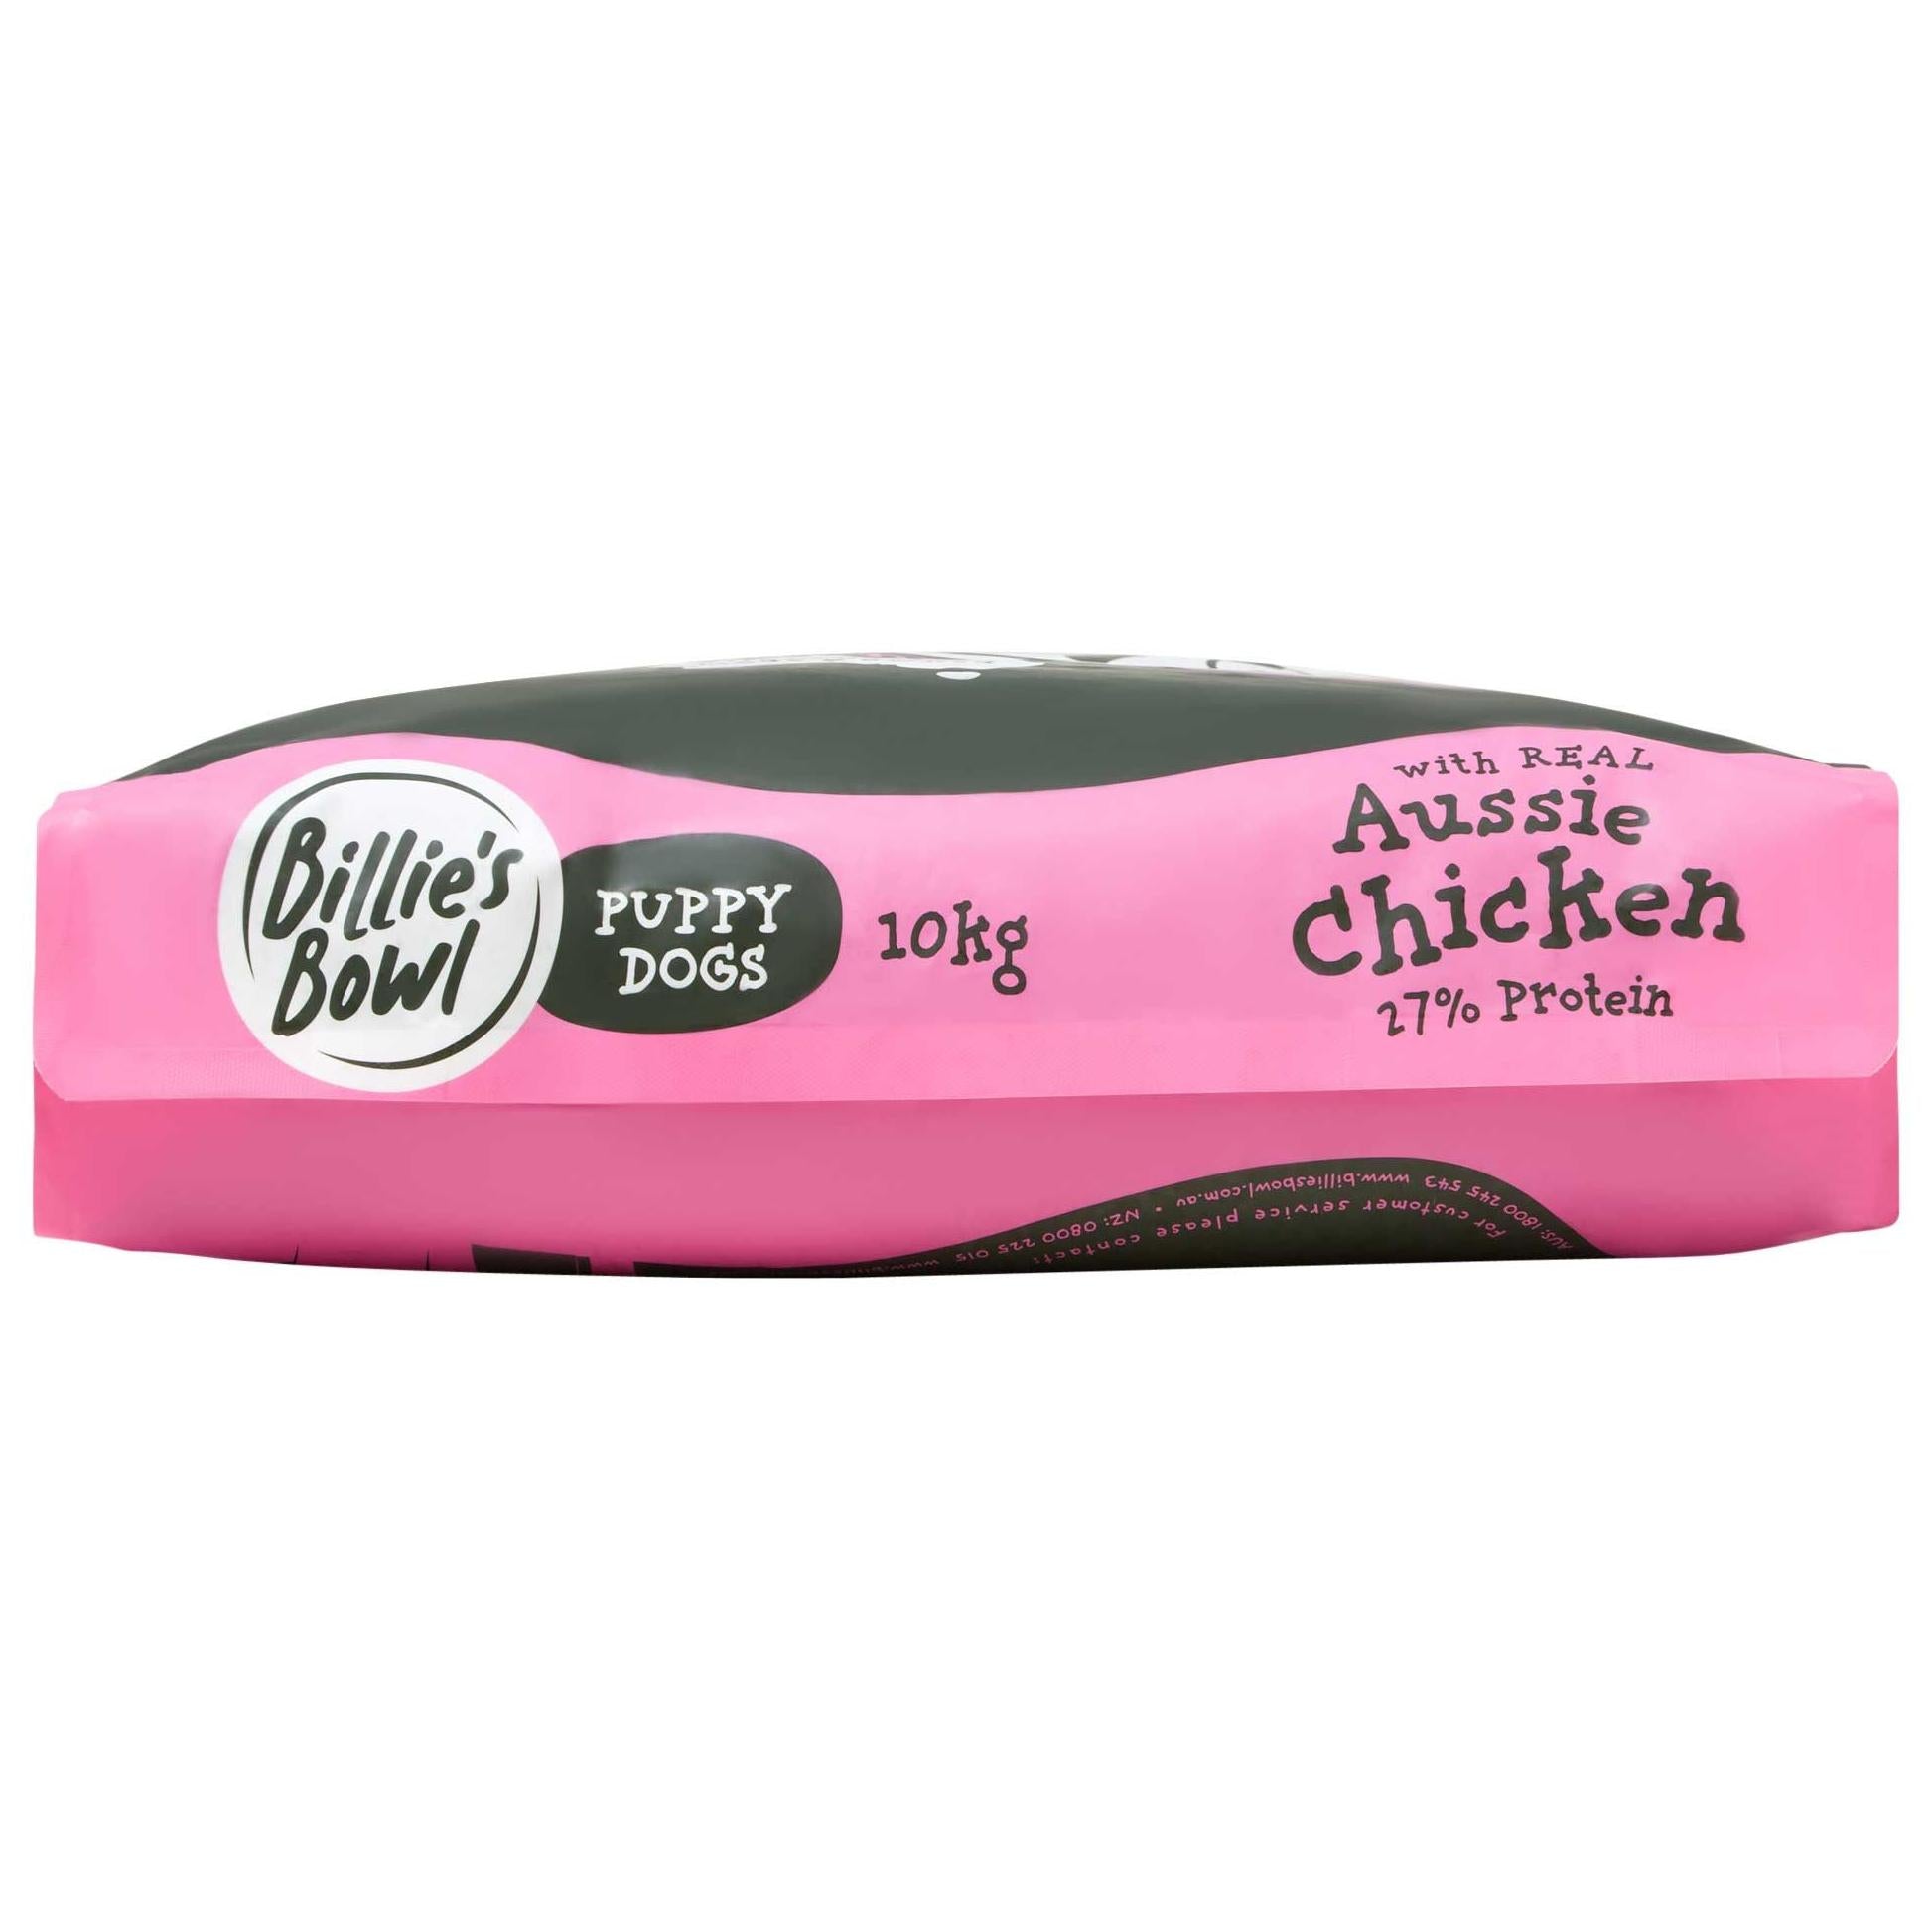 Billie's Bowl Puppy with Real Aussie Chicken Dry Dog Food 10kg (100000037683) [default_color]